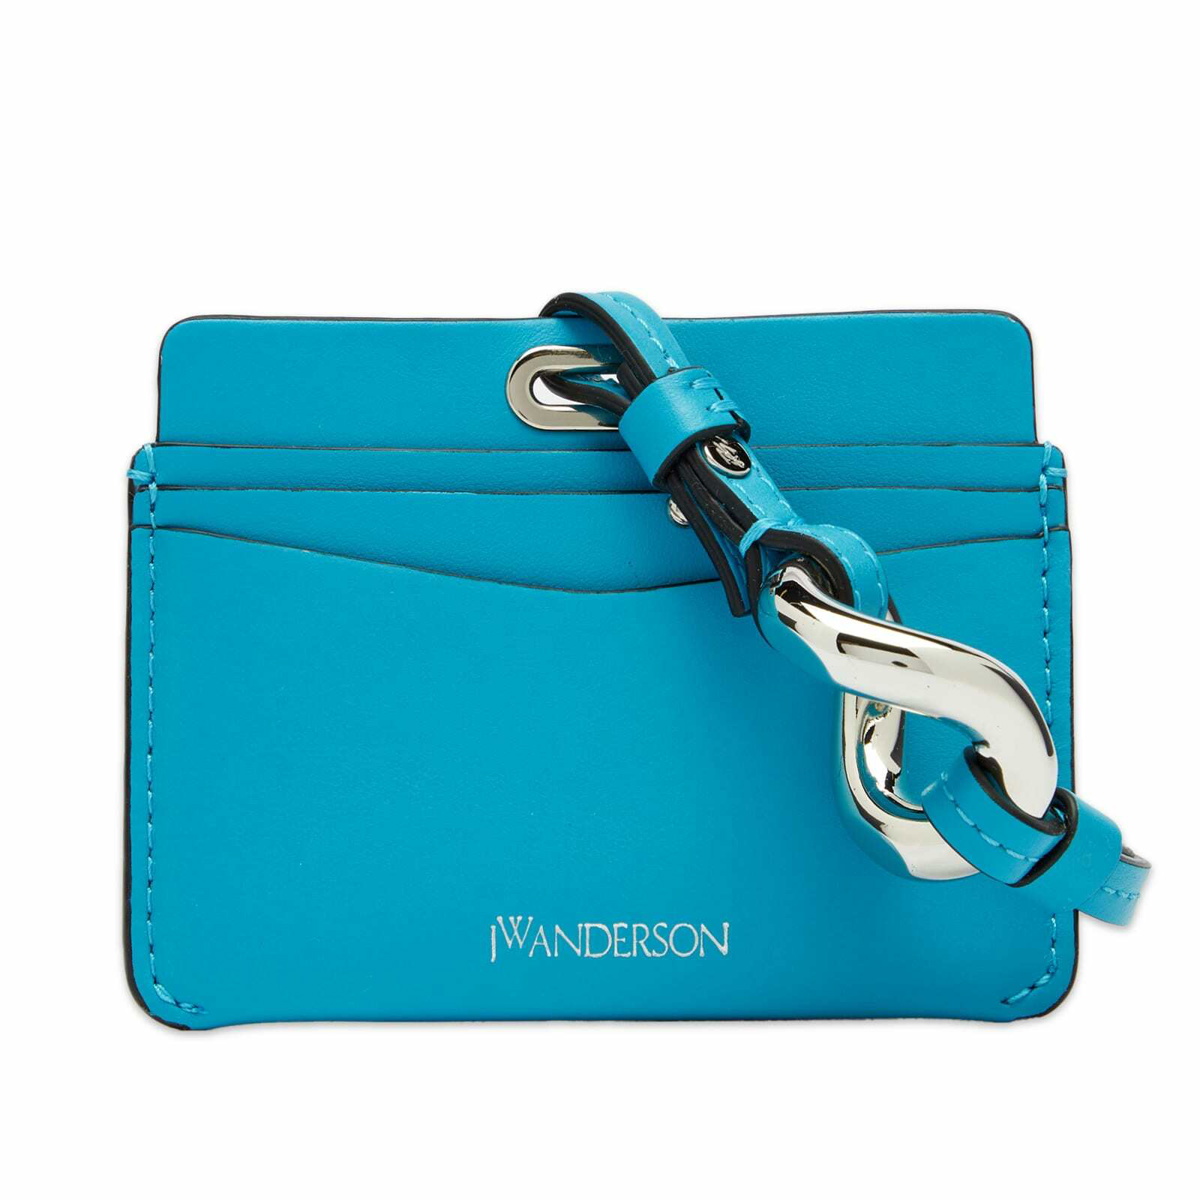 Photo: JW Anderson Men's Chain Strap Cardholder in Turquoise